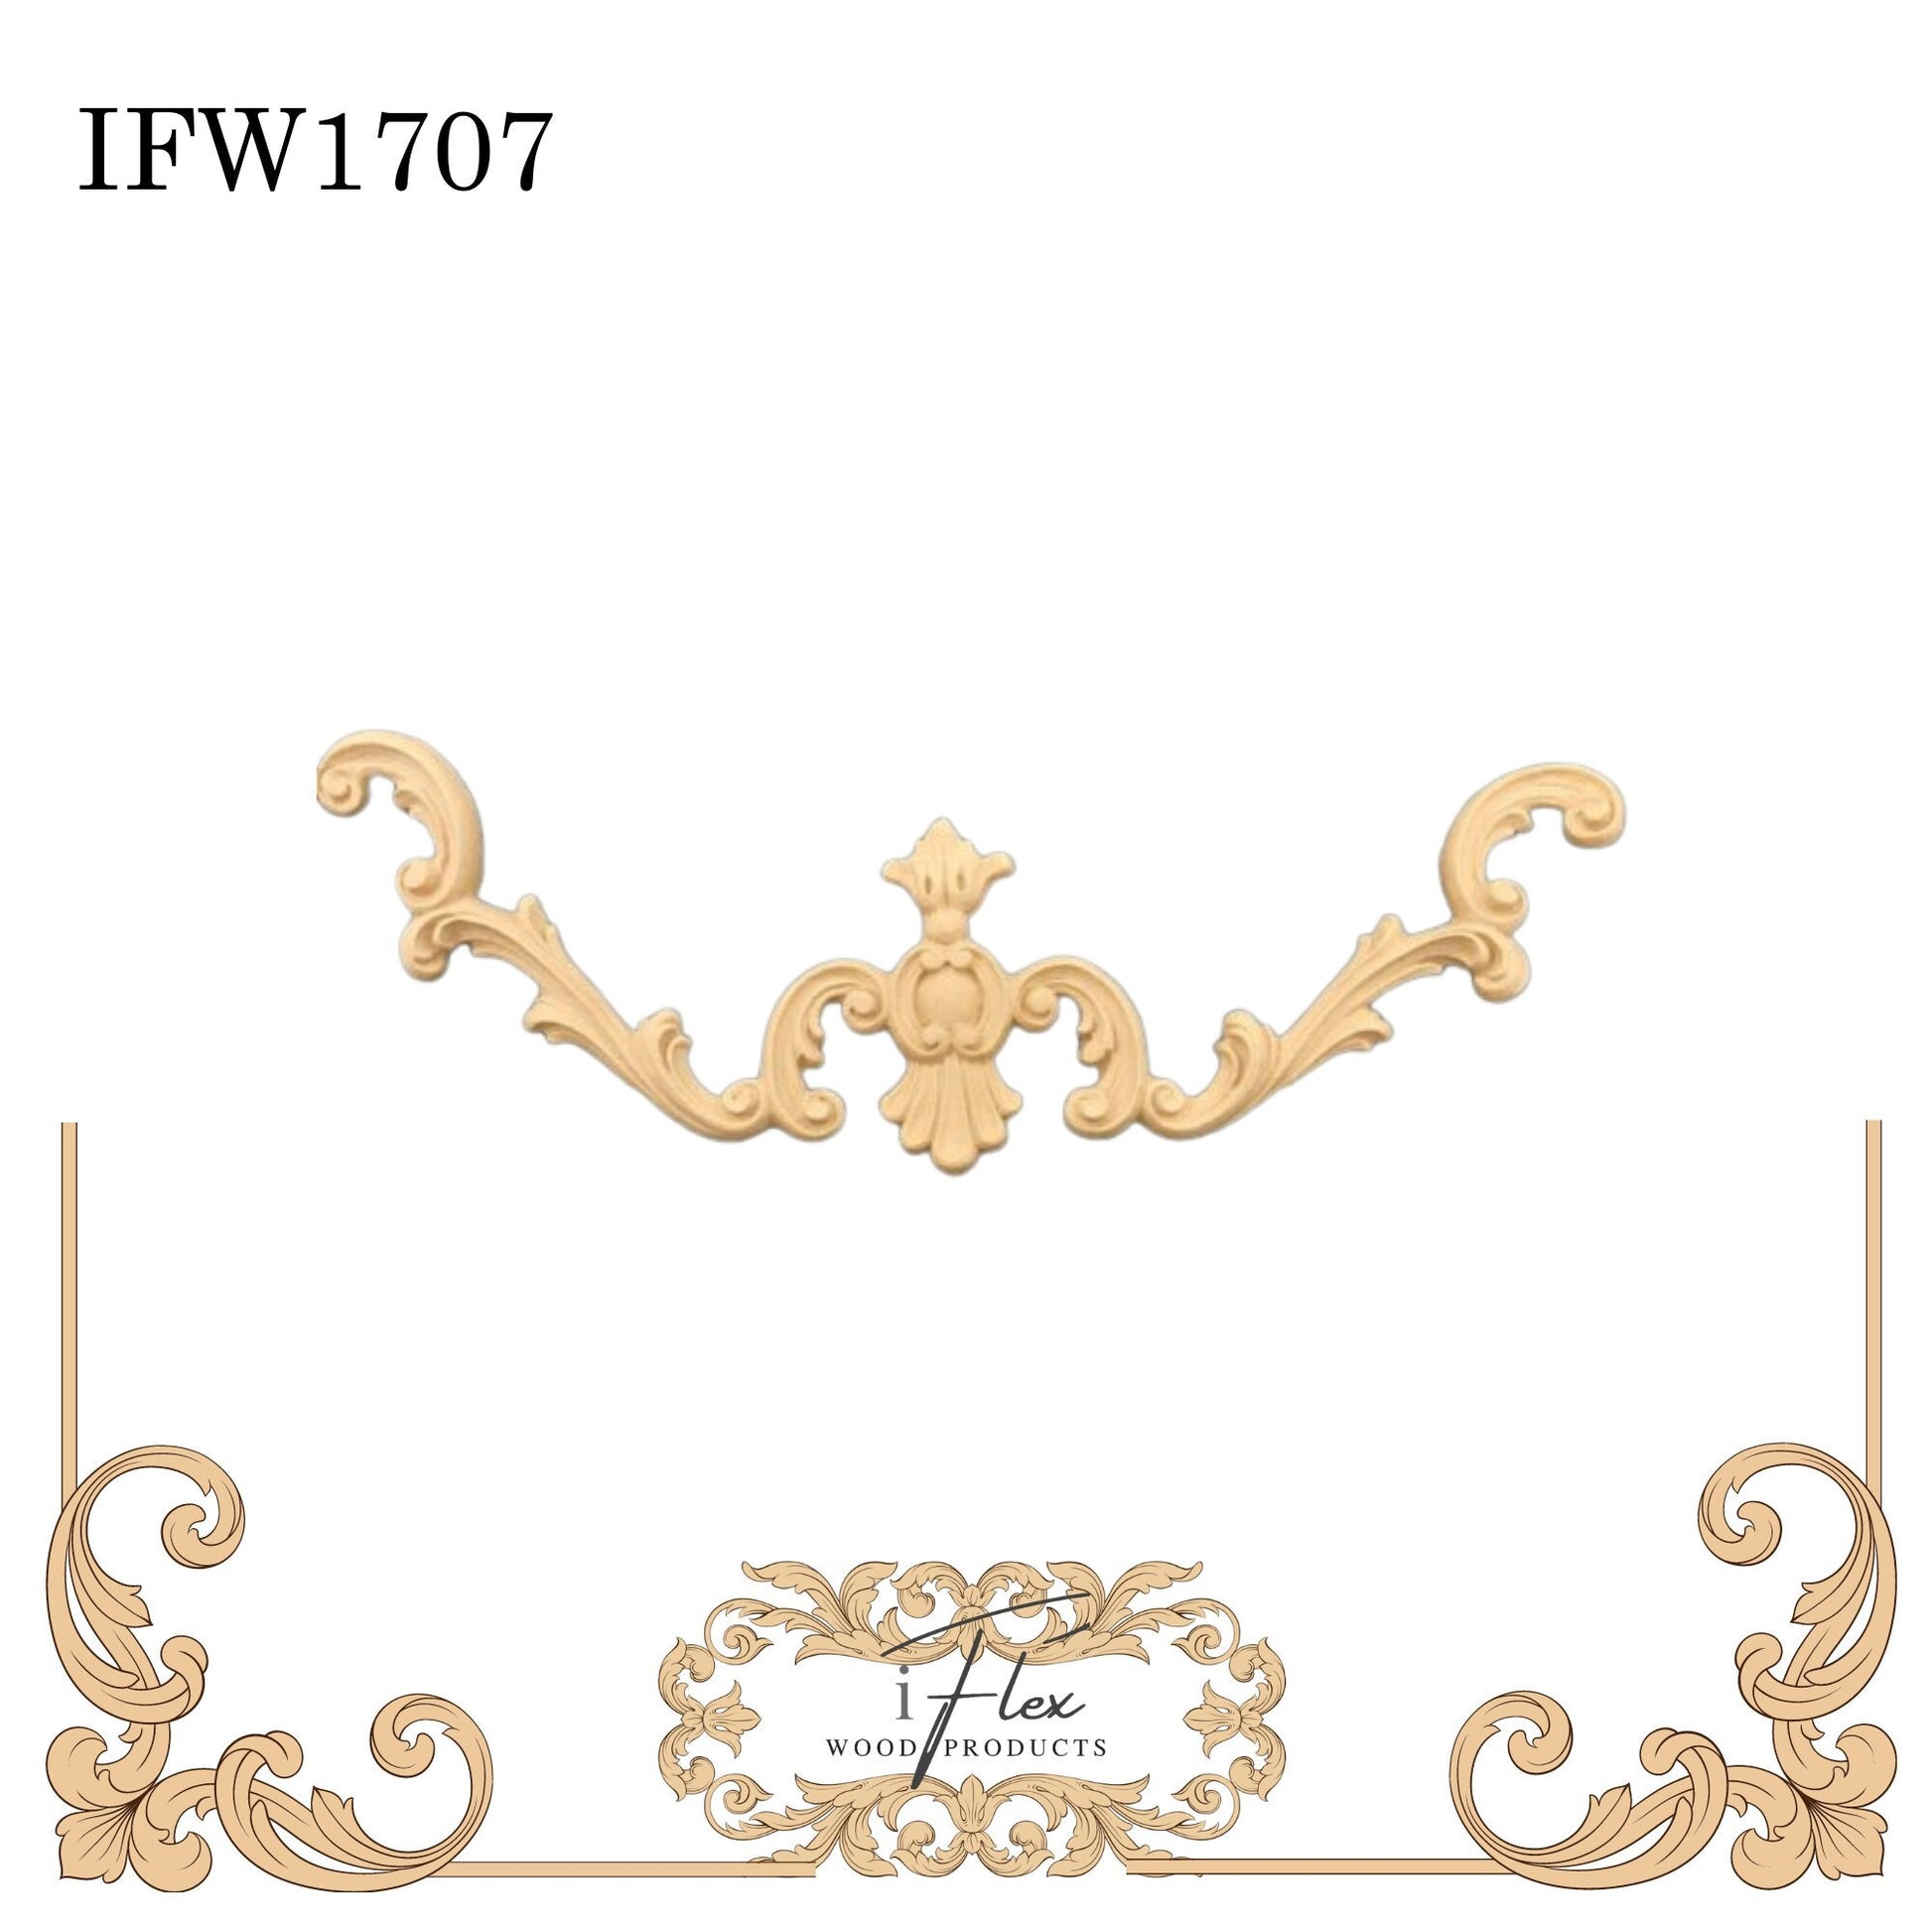 IFW 1707 iFlex Wood Products, bendable mouldings, flexible, wooden appliques, pediment